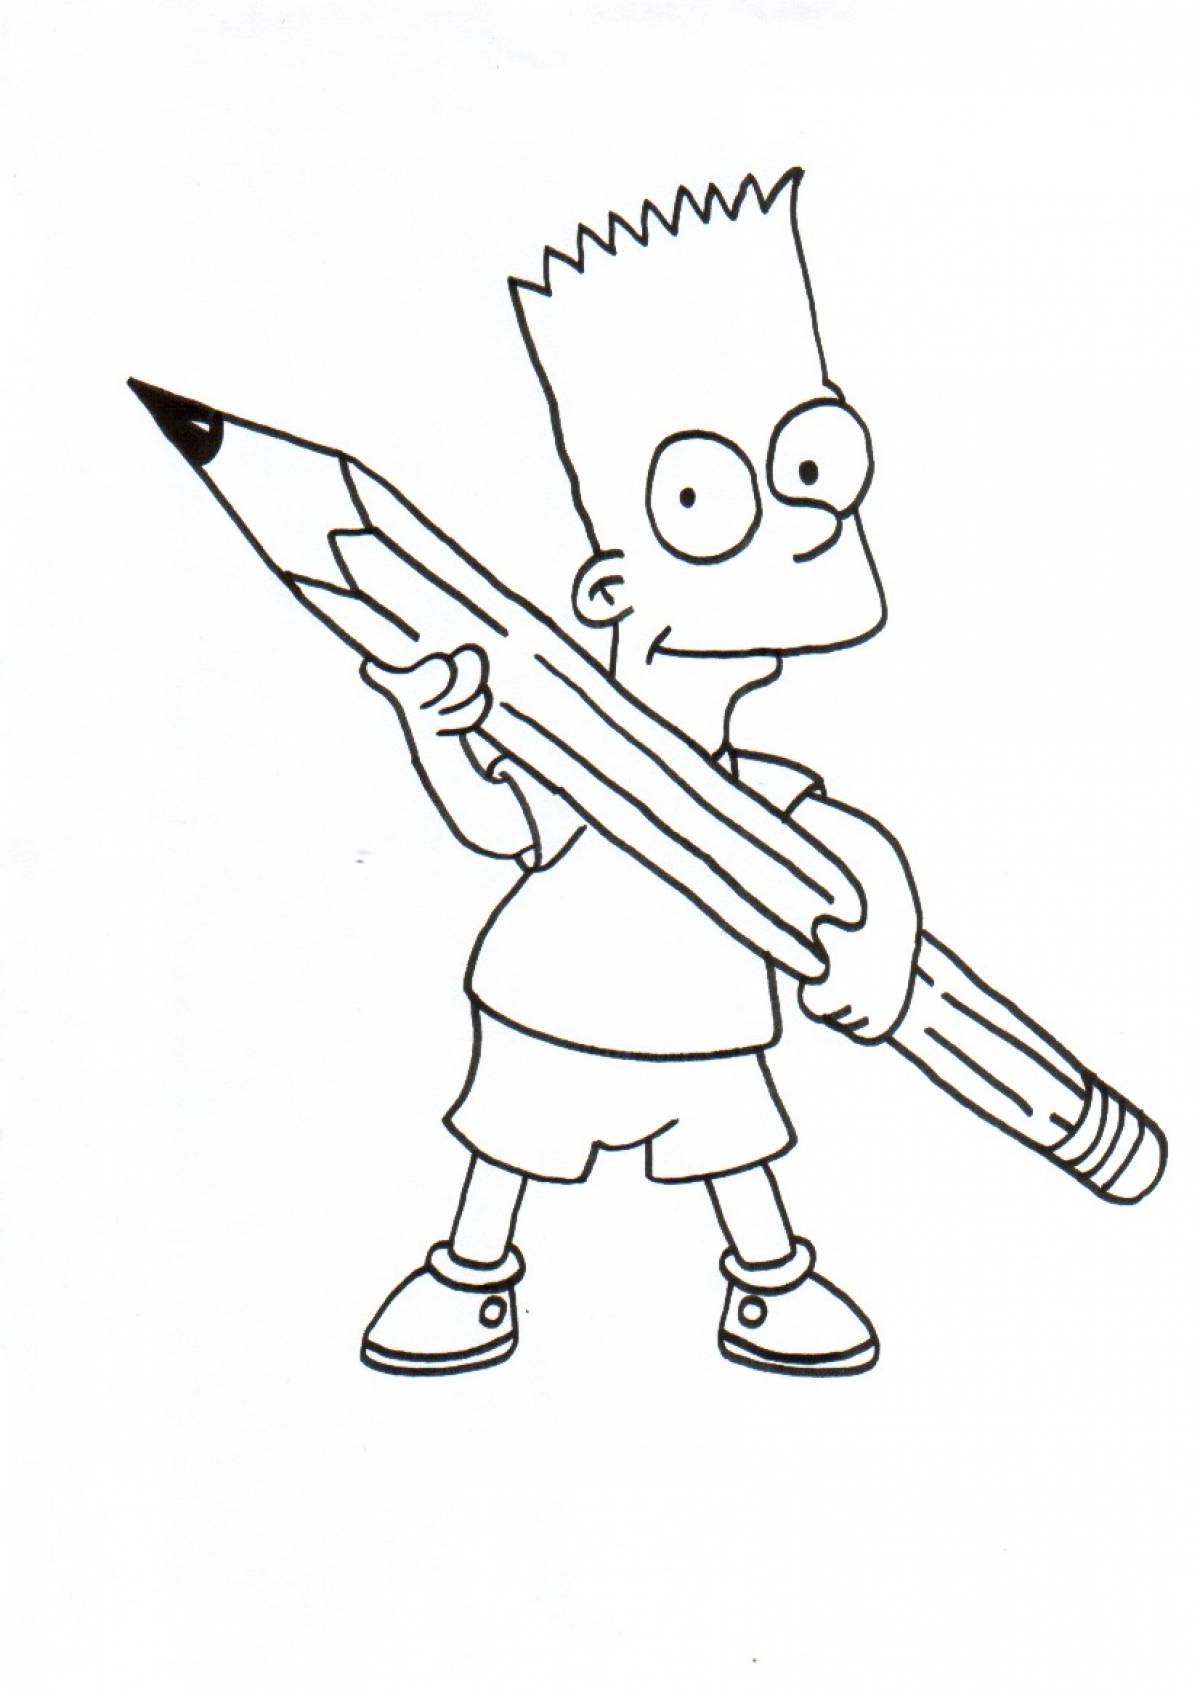 Bart with a pencil